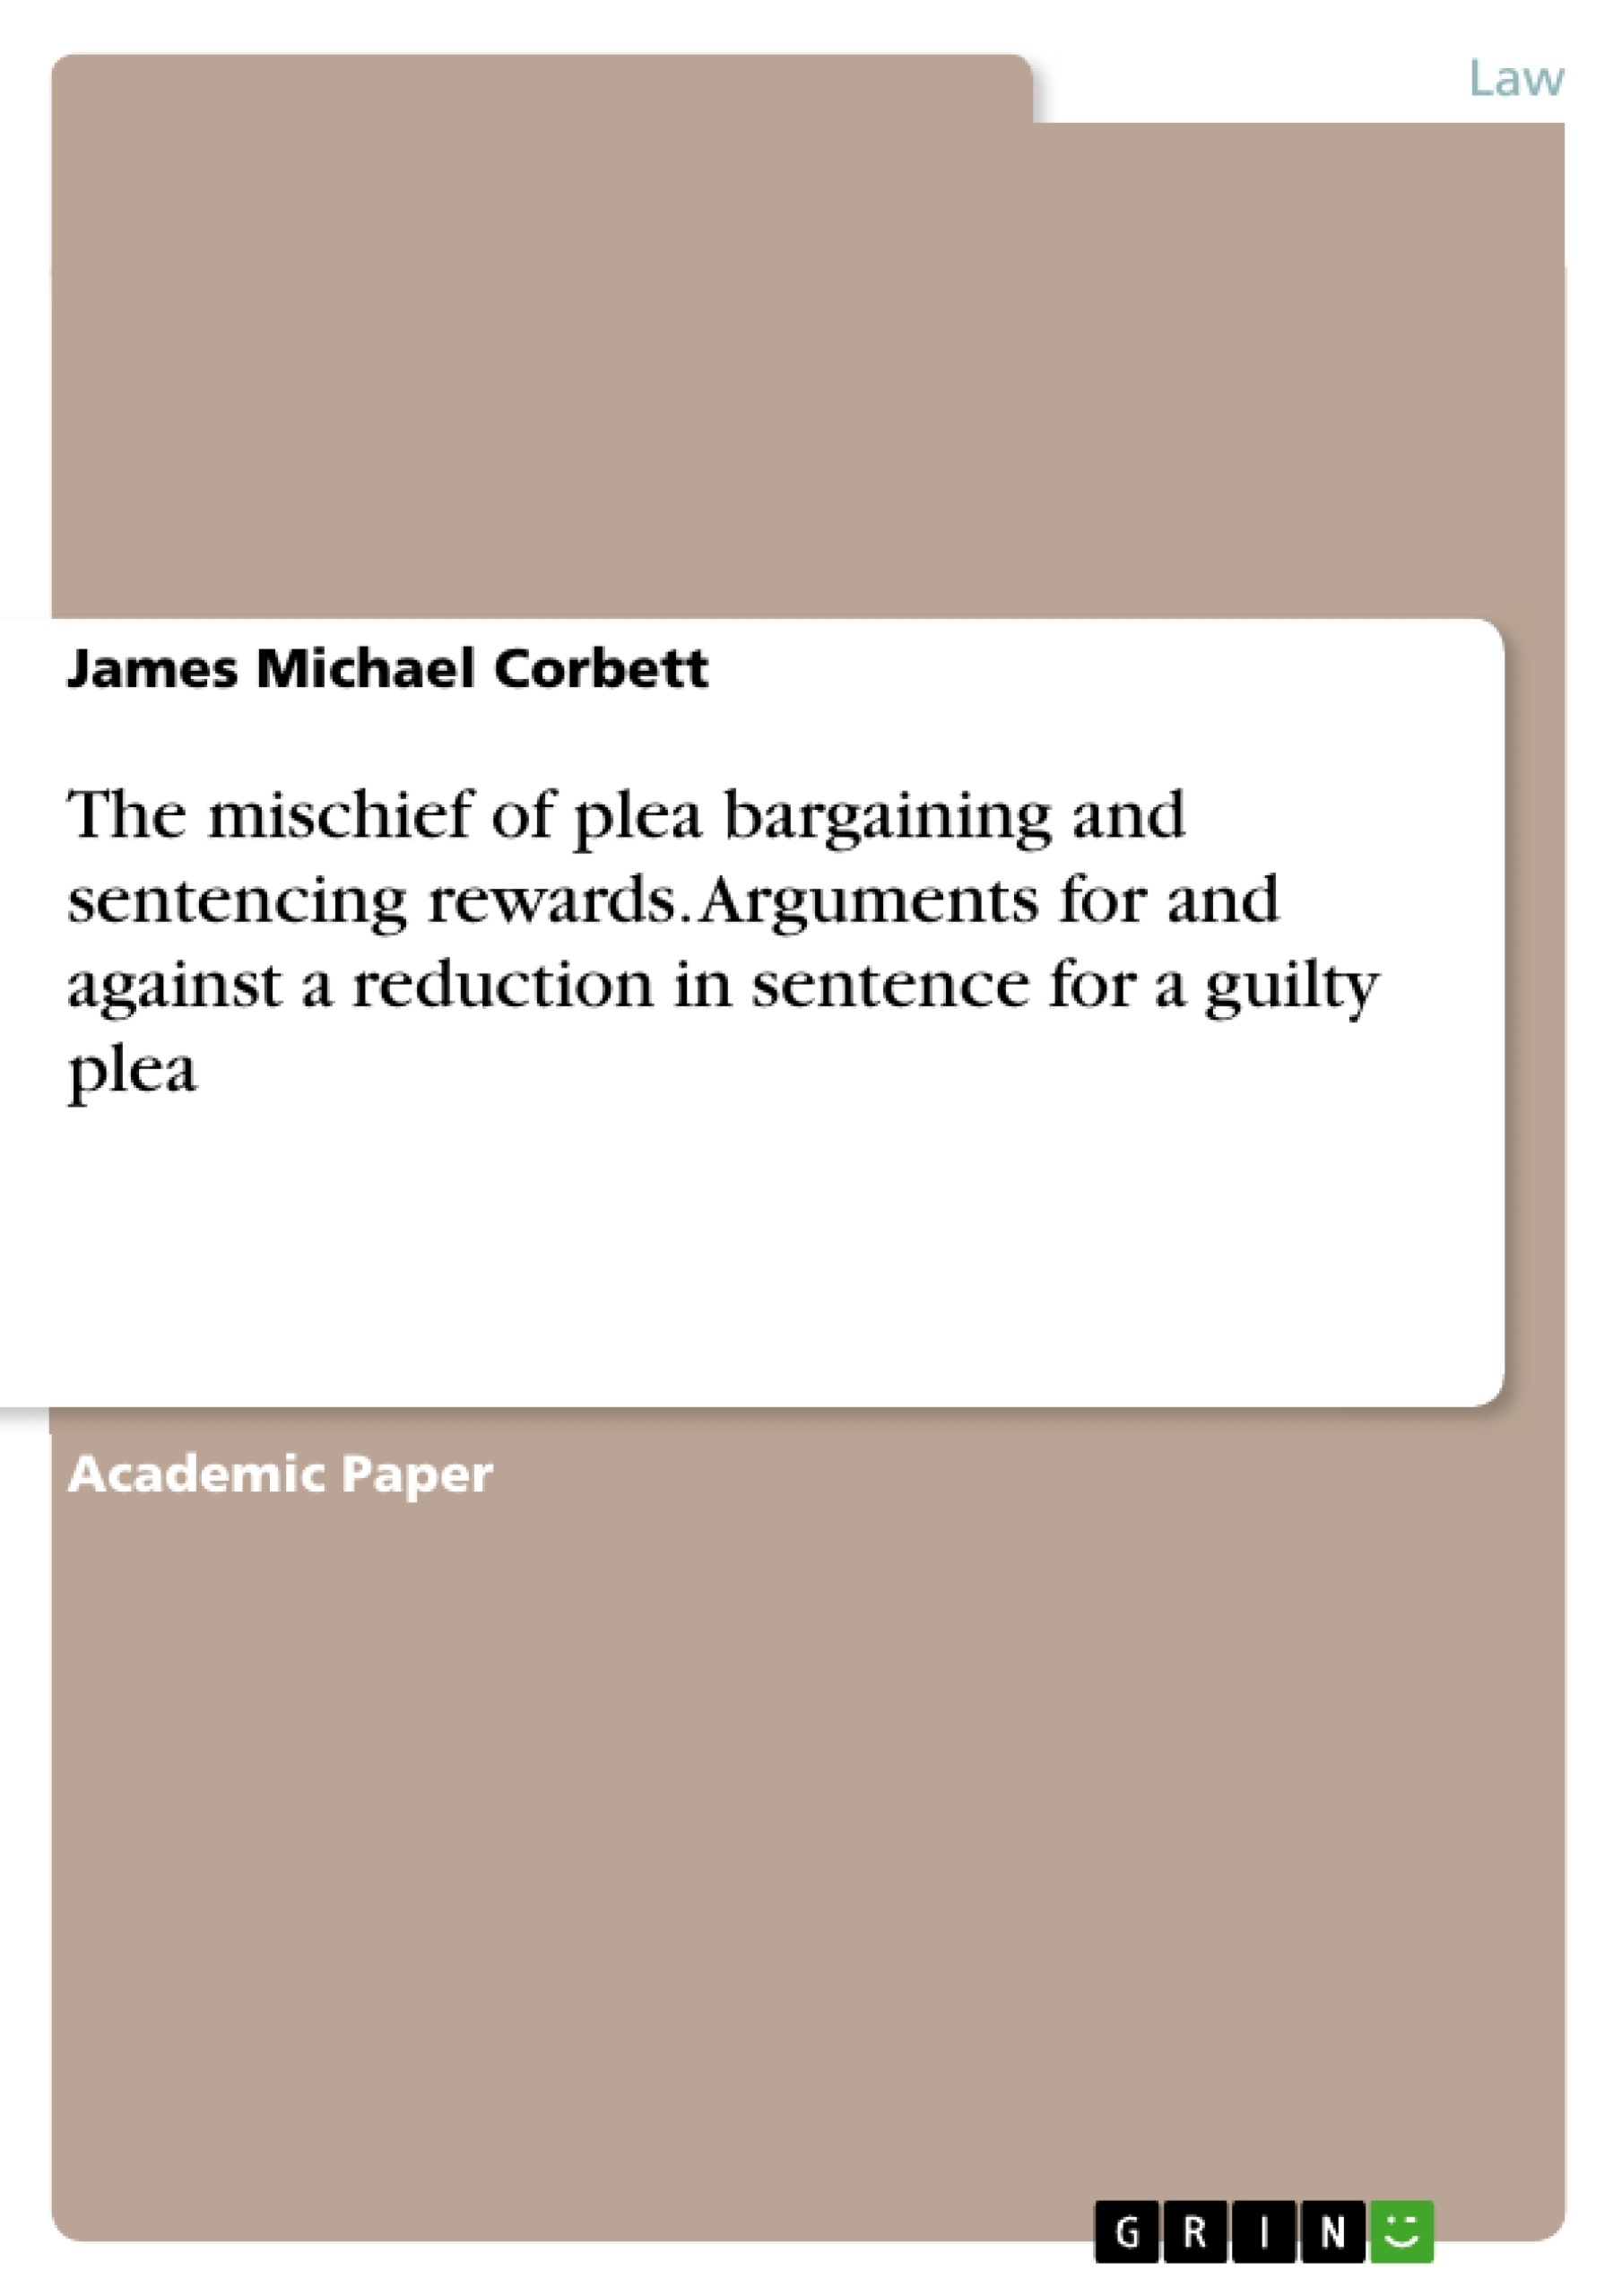 Título: The mischief of plea bargaining and sentencing rewards. Arguments for and against a reduction in sentence for a guilty plea